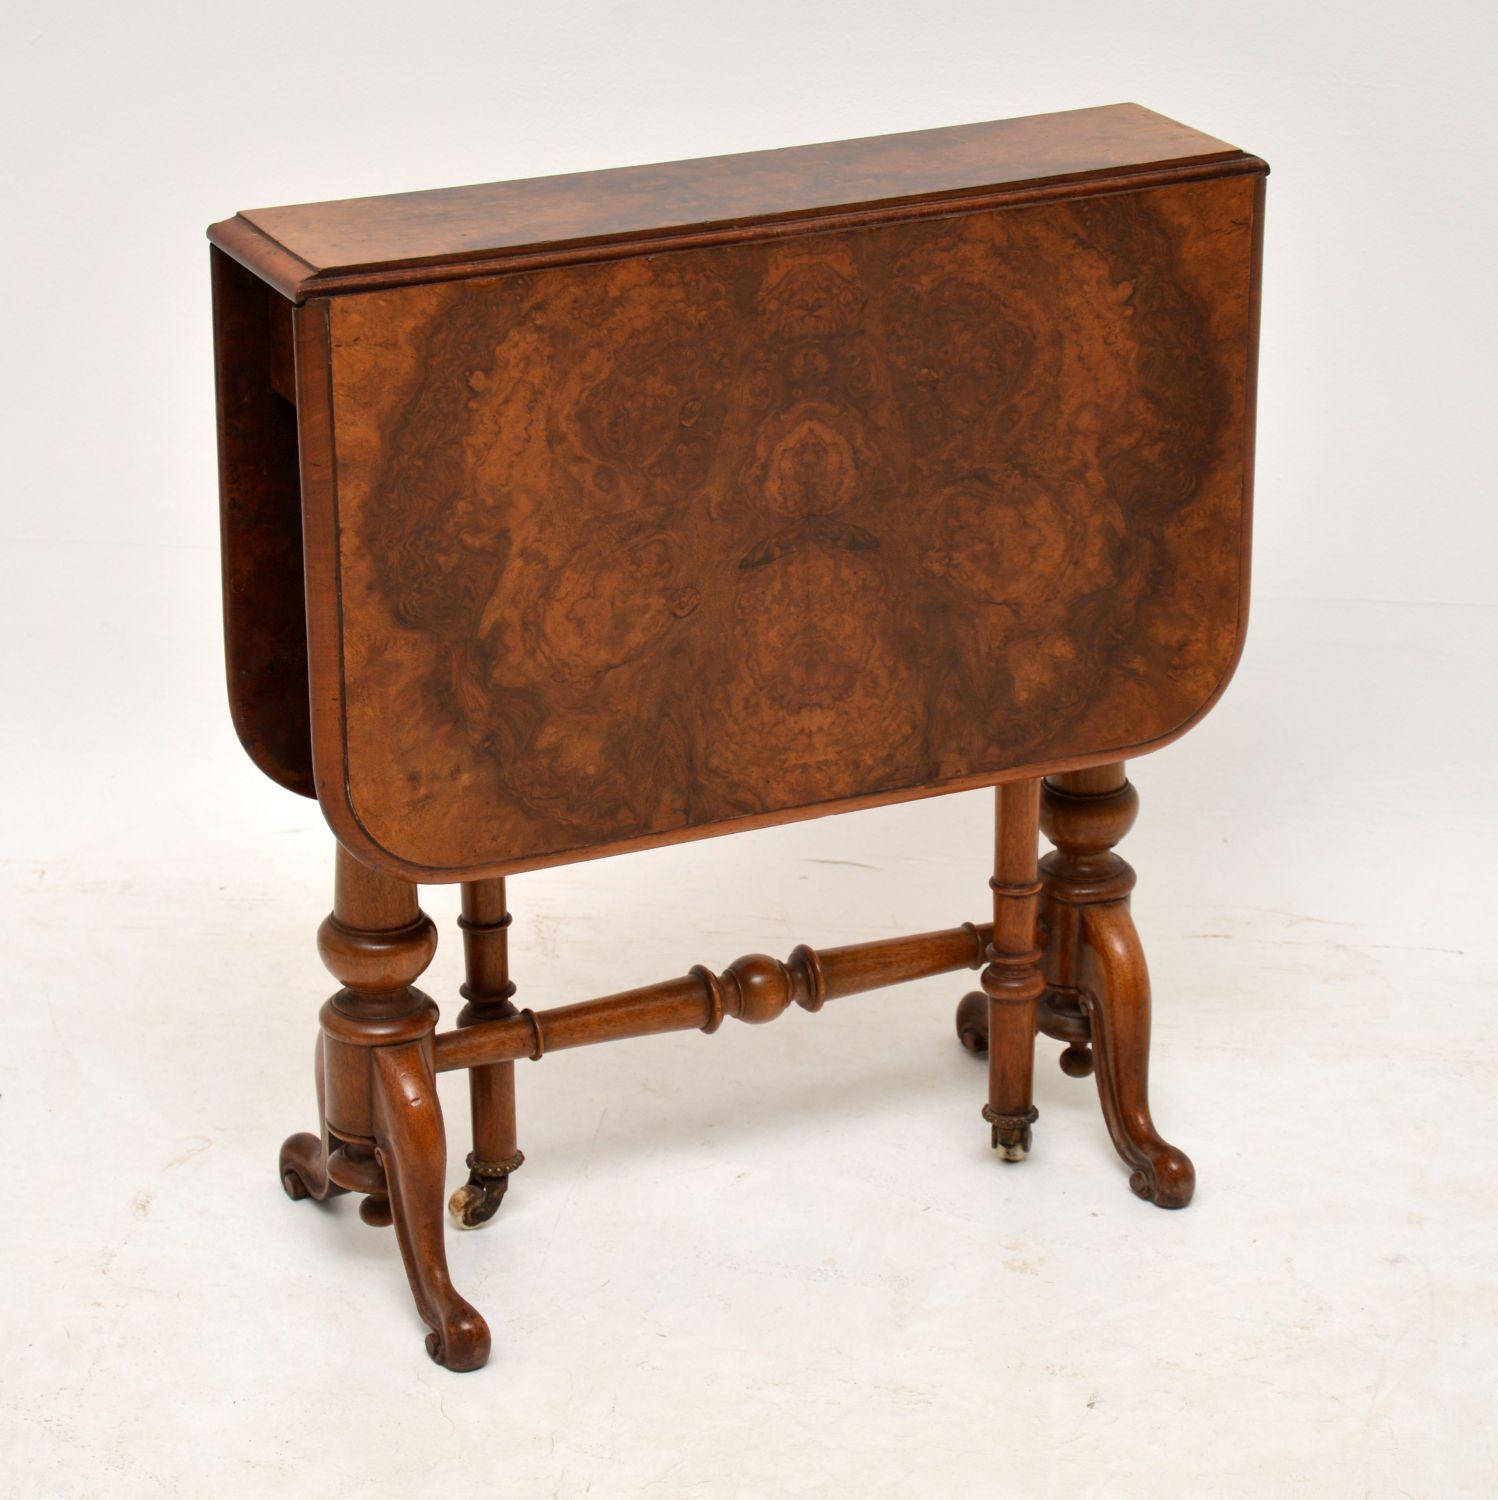 Small antique early Victorian walnut drop-leaf coffee table or side table in excellent original condition and dating from the 1840s-1860s period. The top is a beautifully patterned burr walnut and the rest is all solid walnut with turned legs, cross